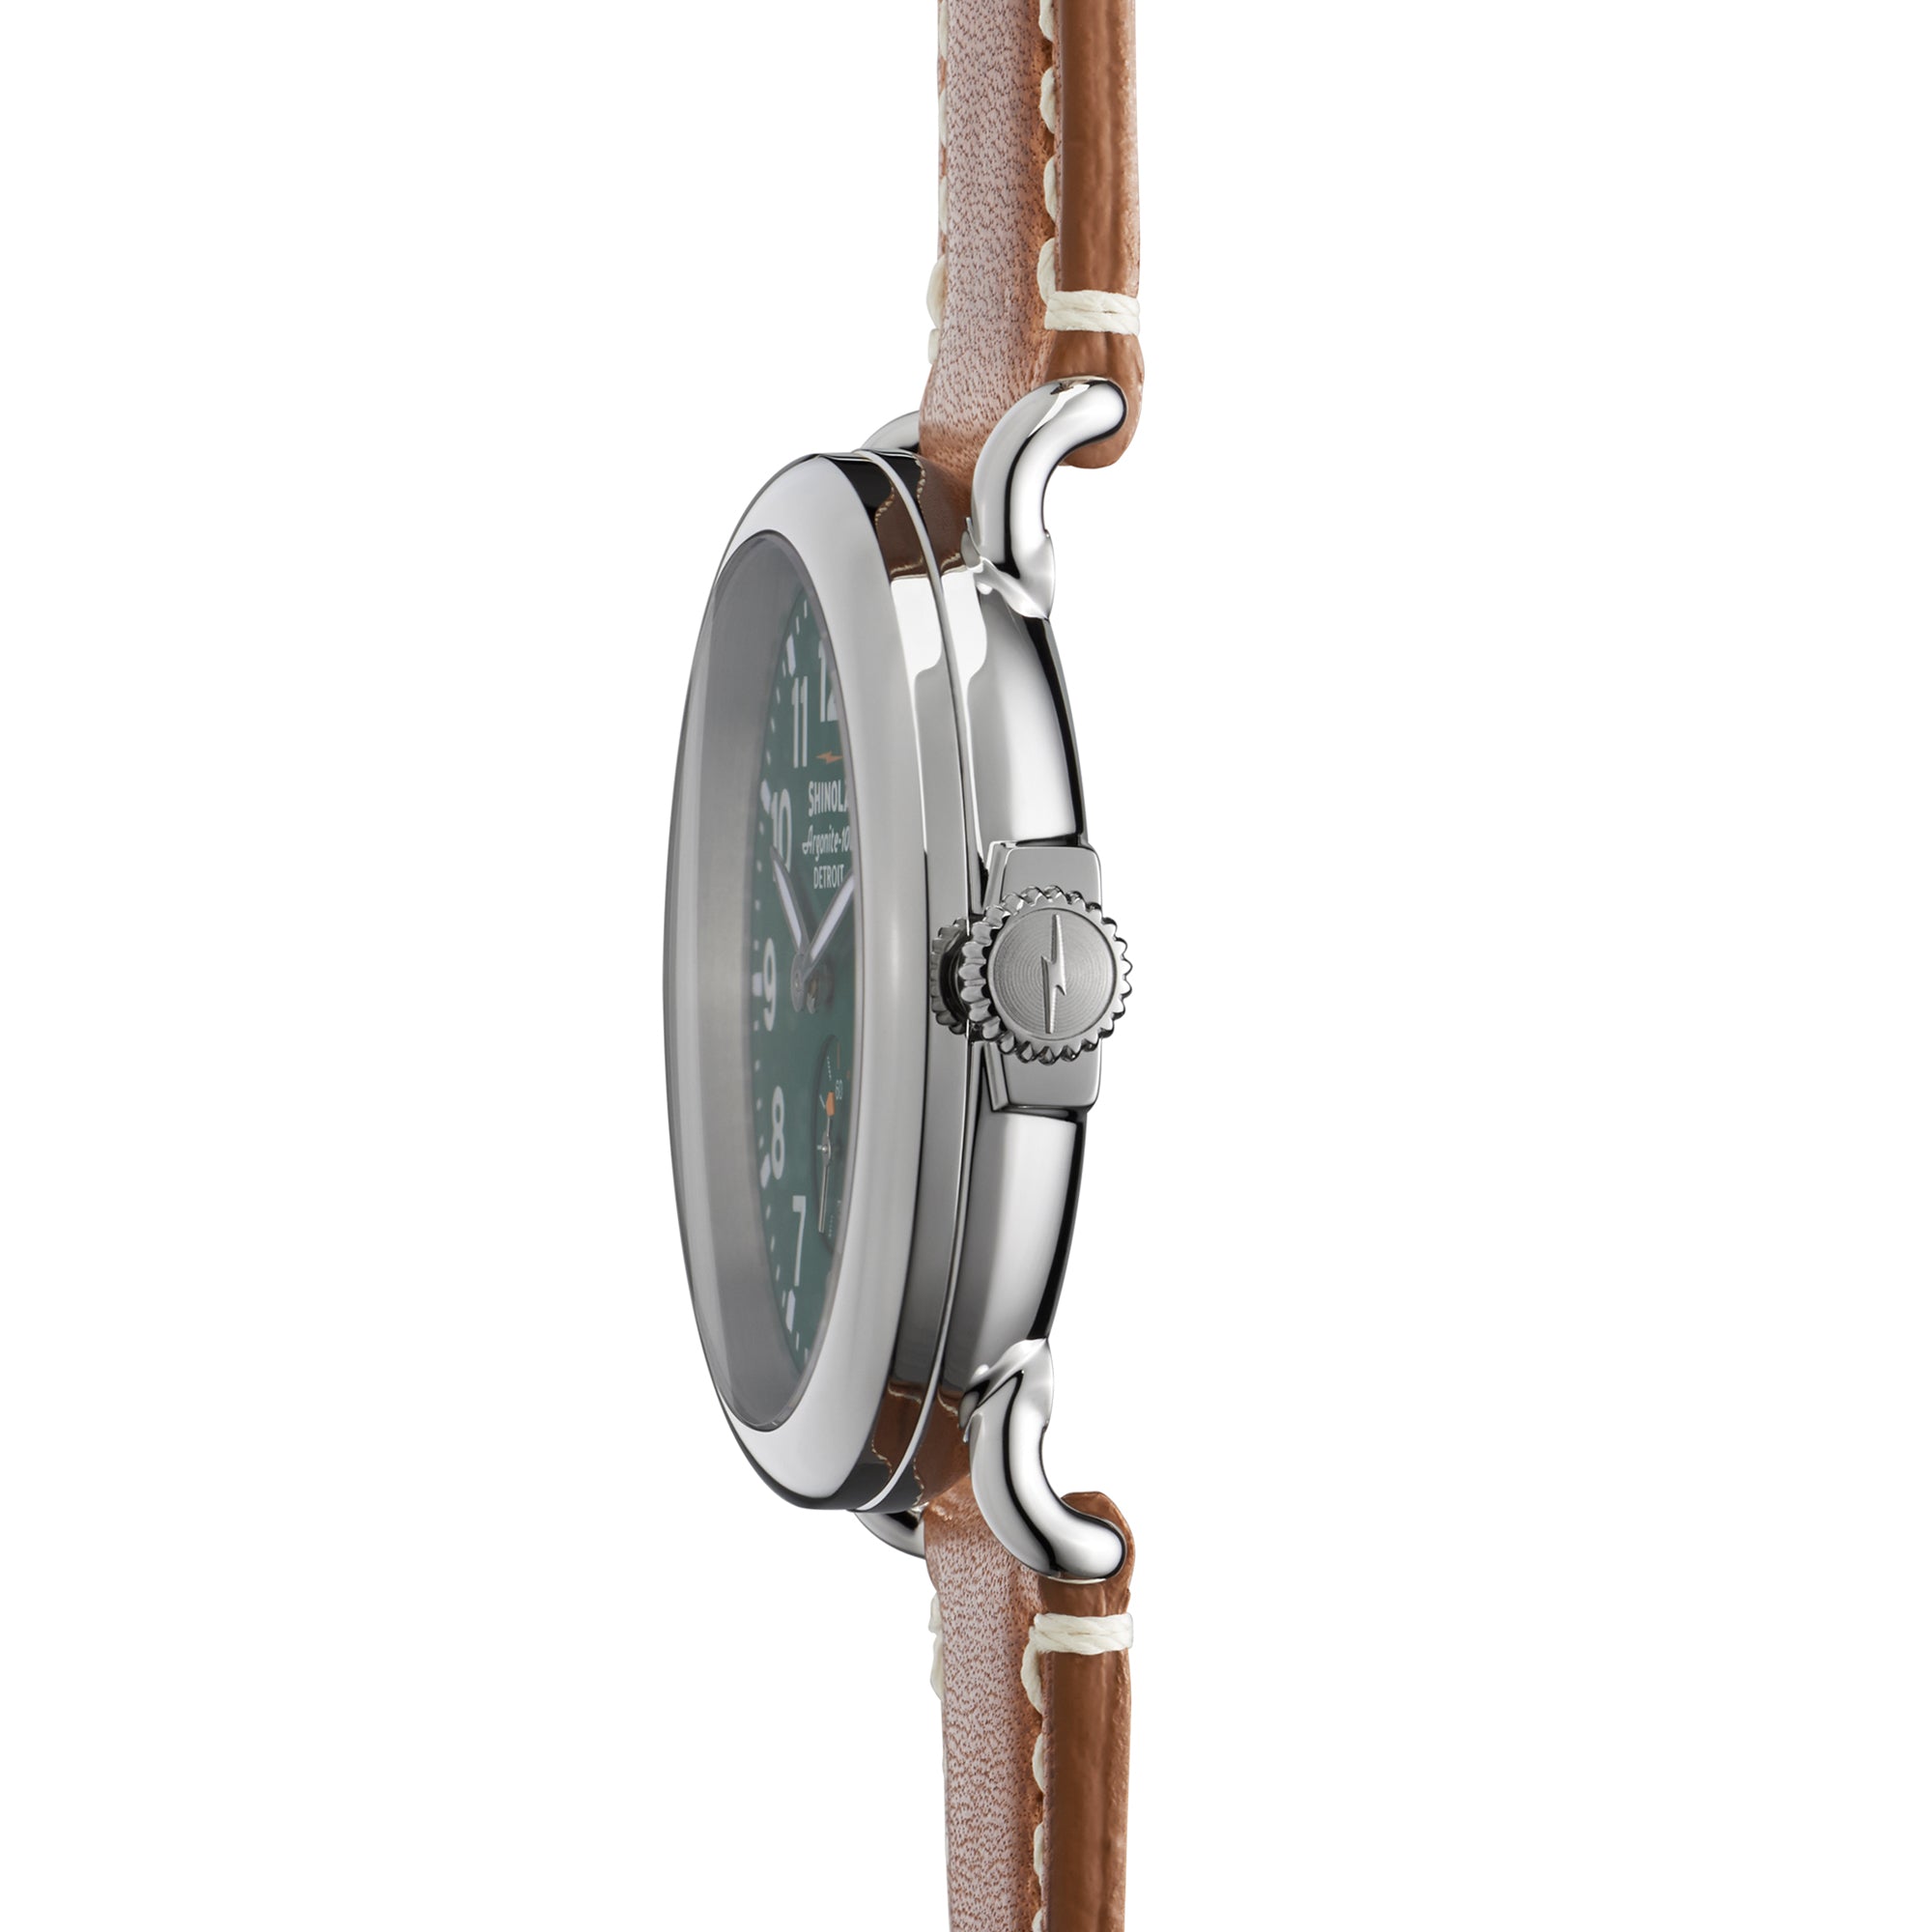 Shinola Mens Runwell Watch with Green Dial and Brown Leather Strap (quartz movement)